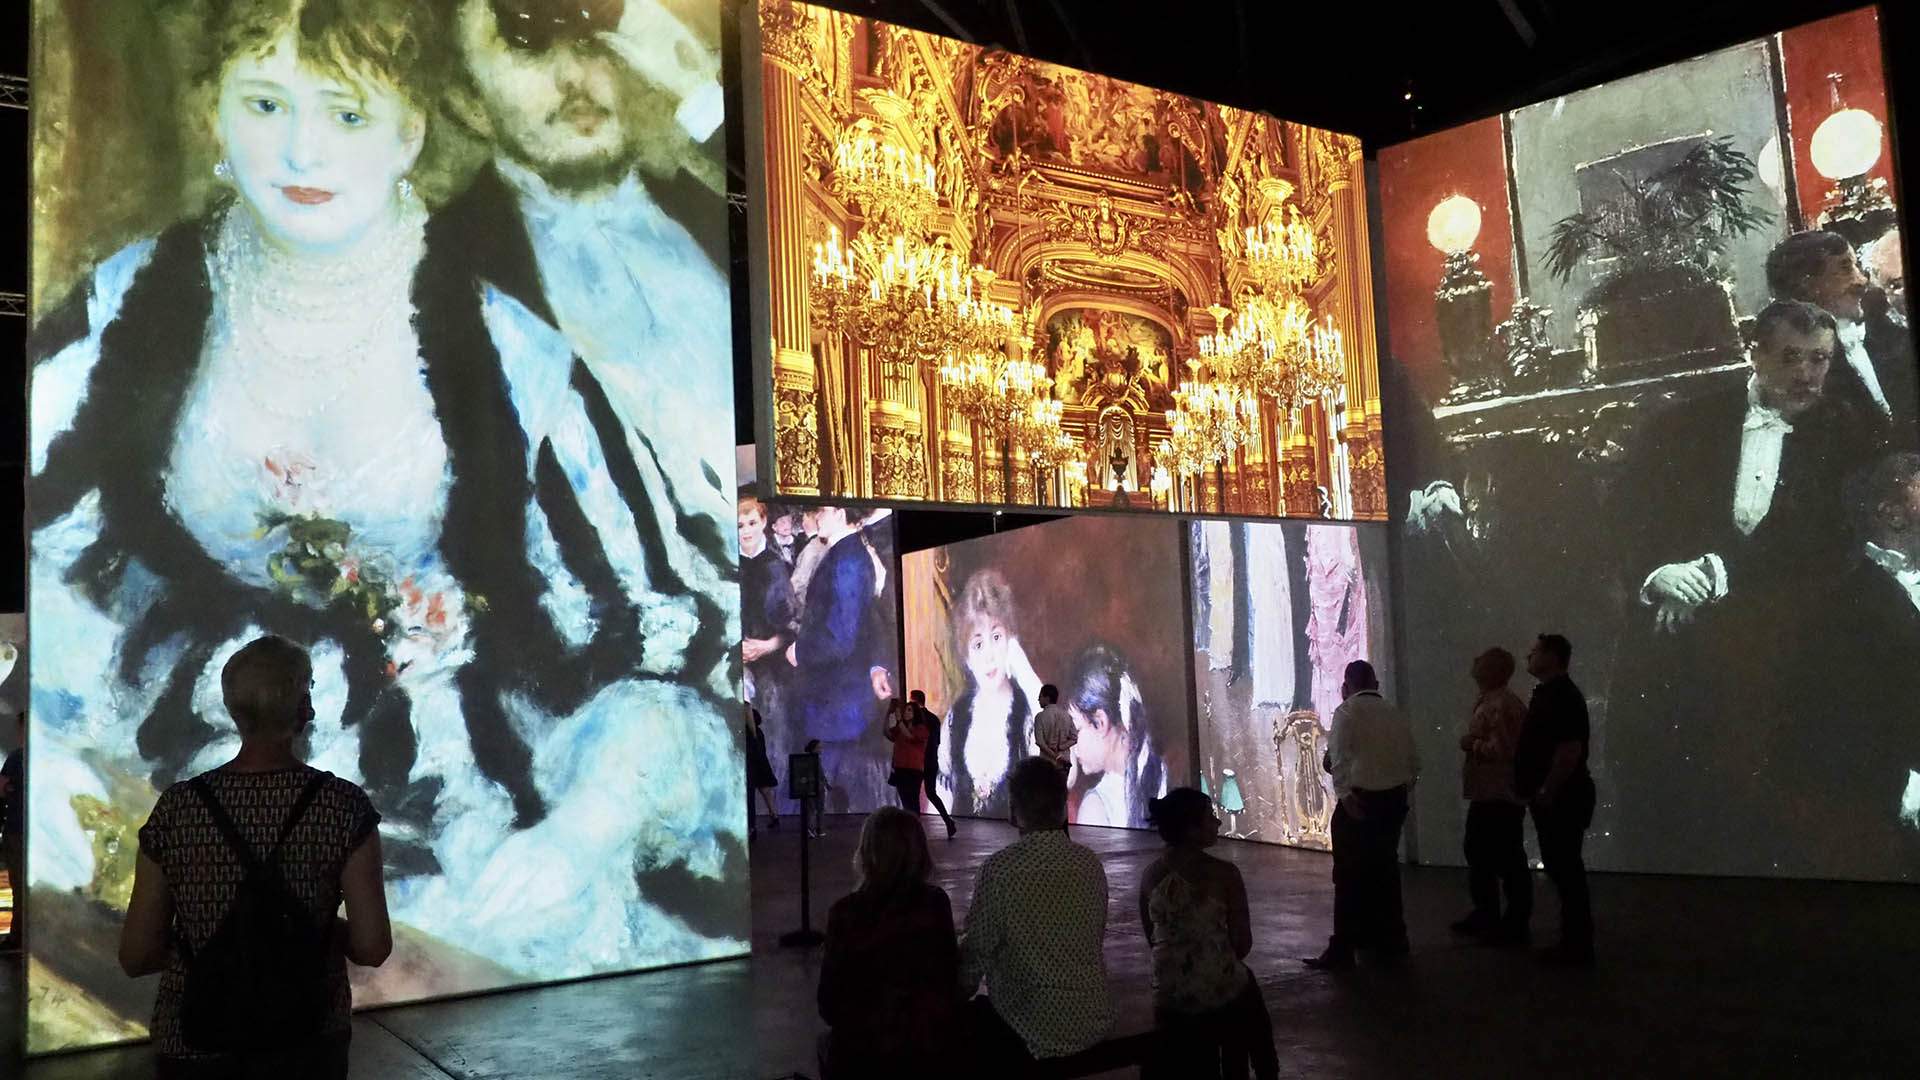 'Monet in Paris' Is the Stunning New Multi-Sensory Exhibition Making Its World Premiere in Brisbane